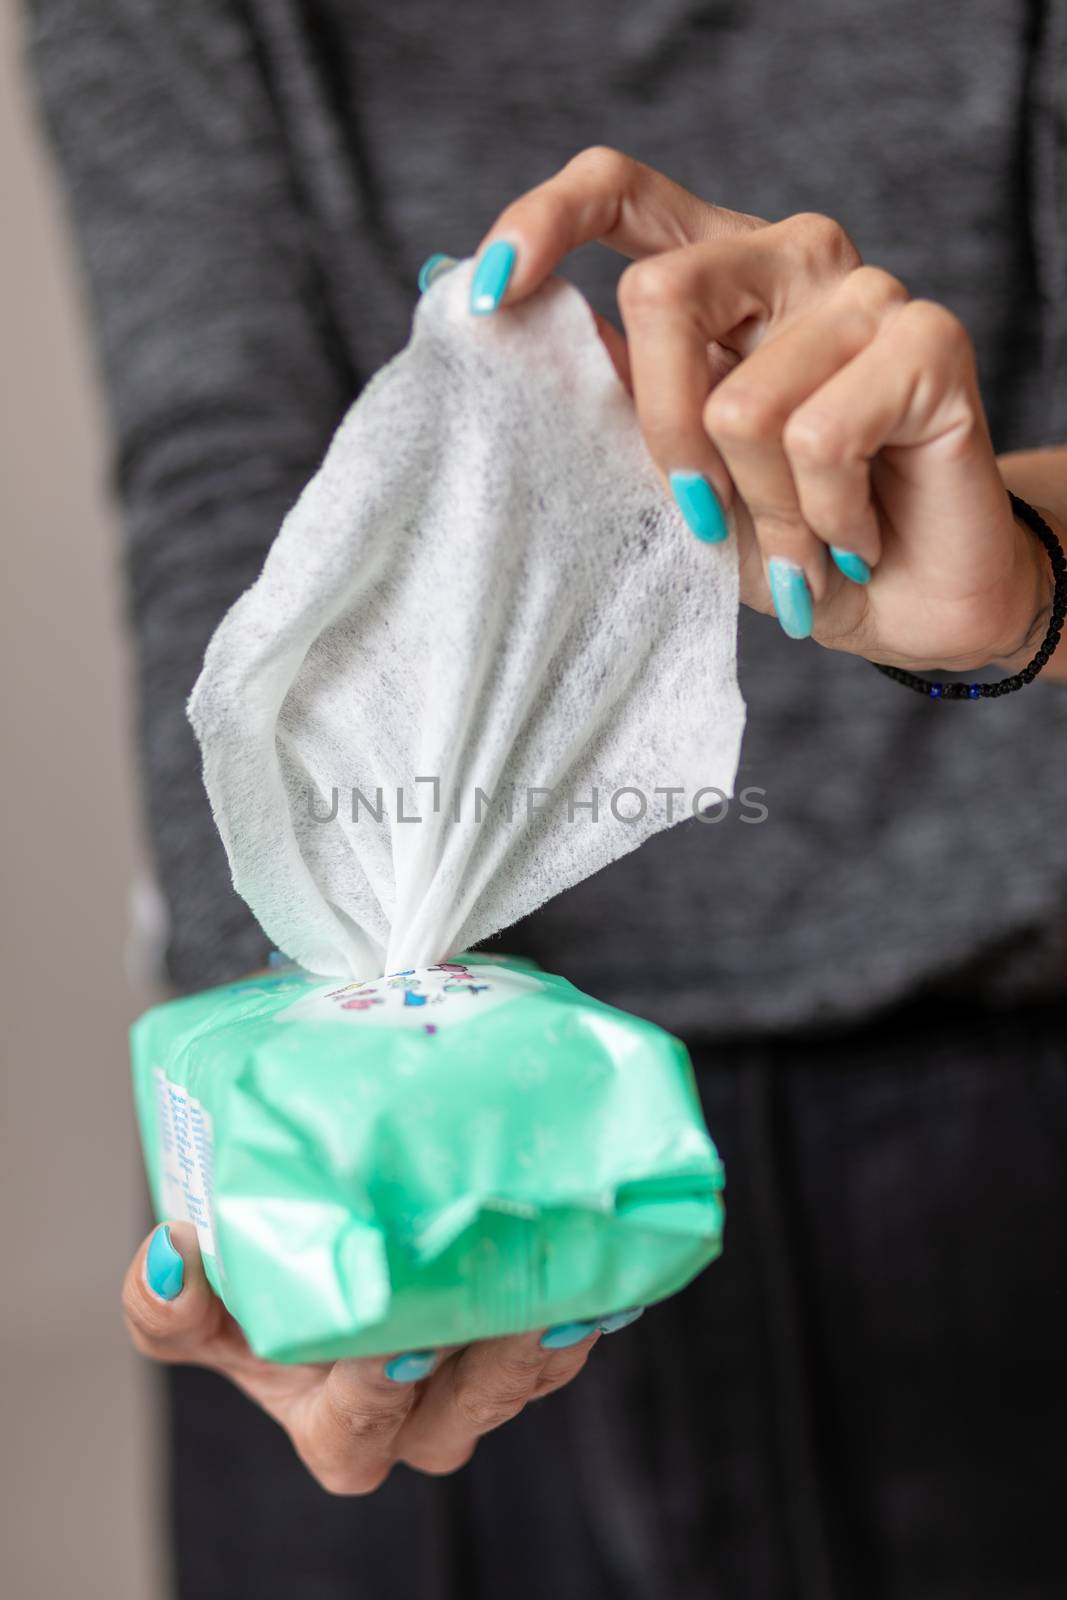 Old woman hand taking the wet wipe to clean skin or surface stoc by adamr